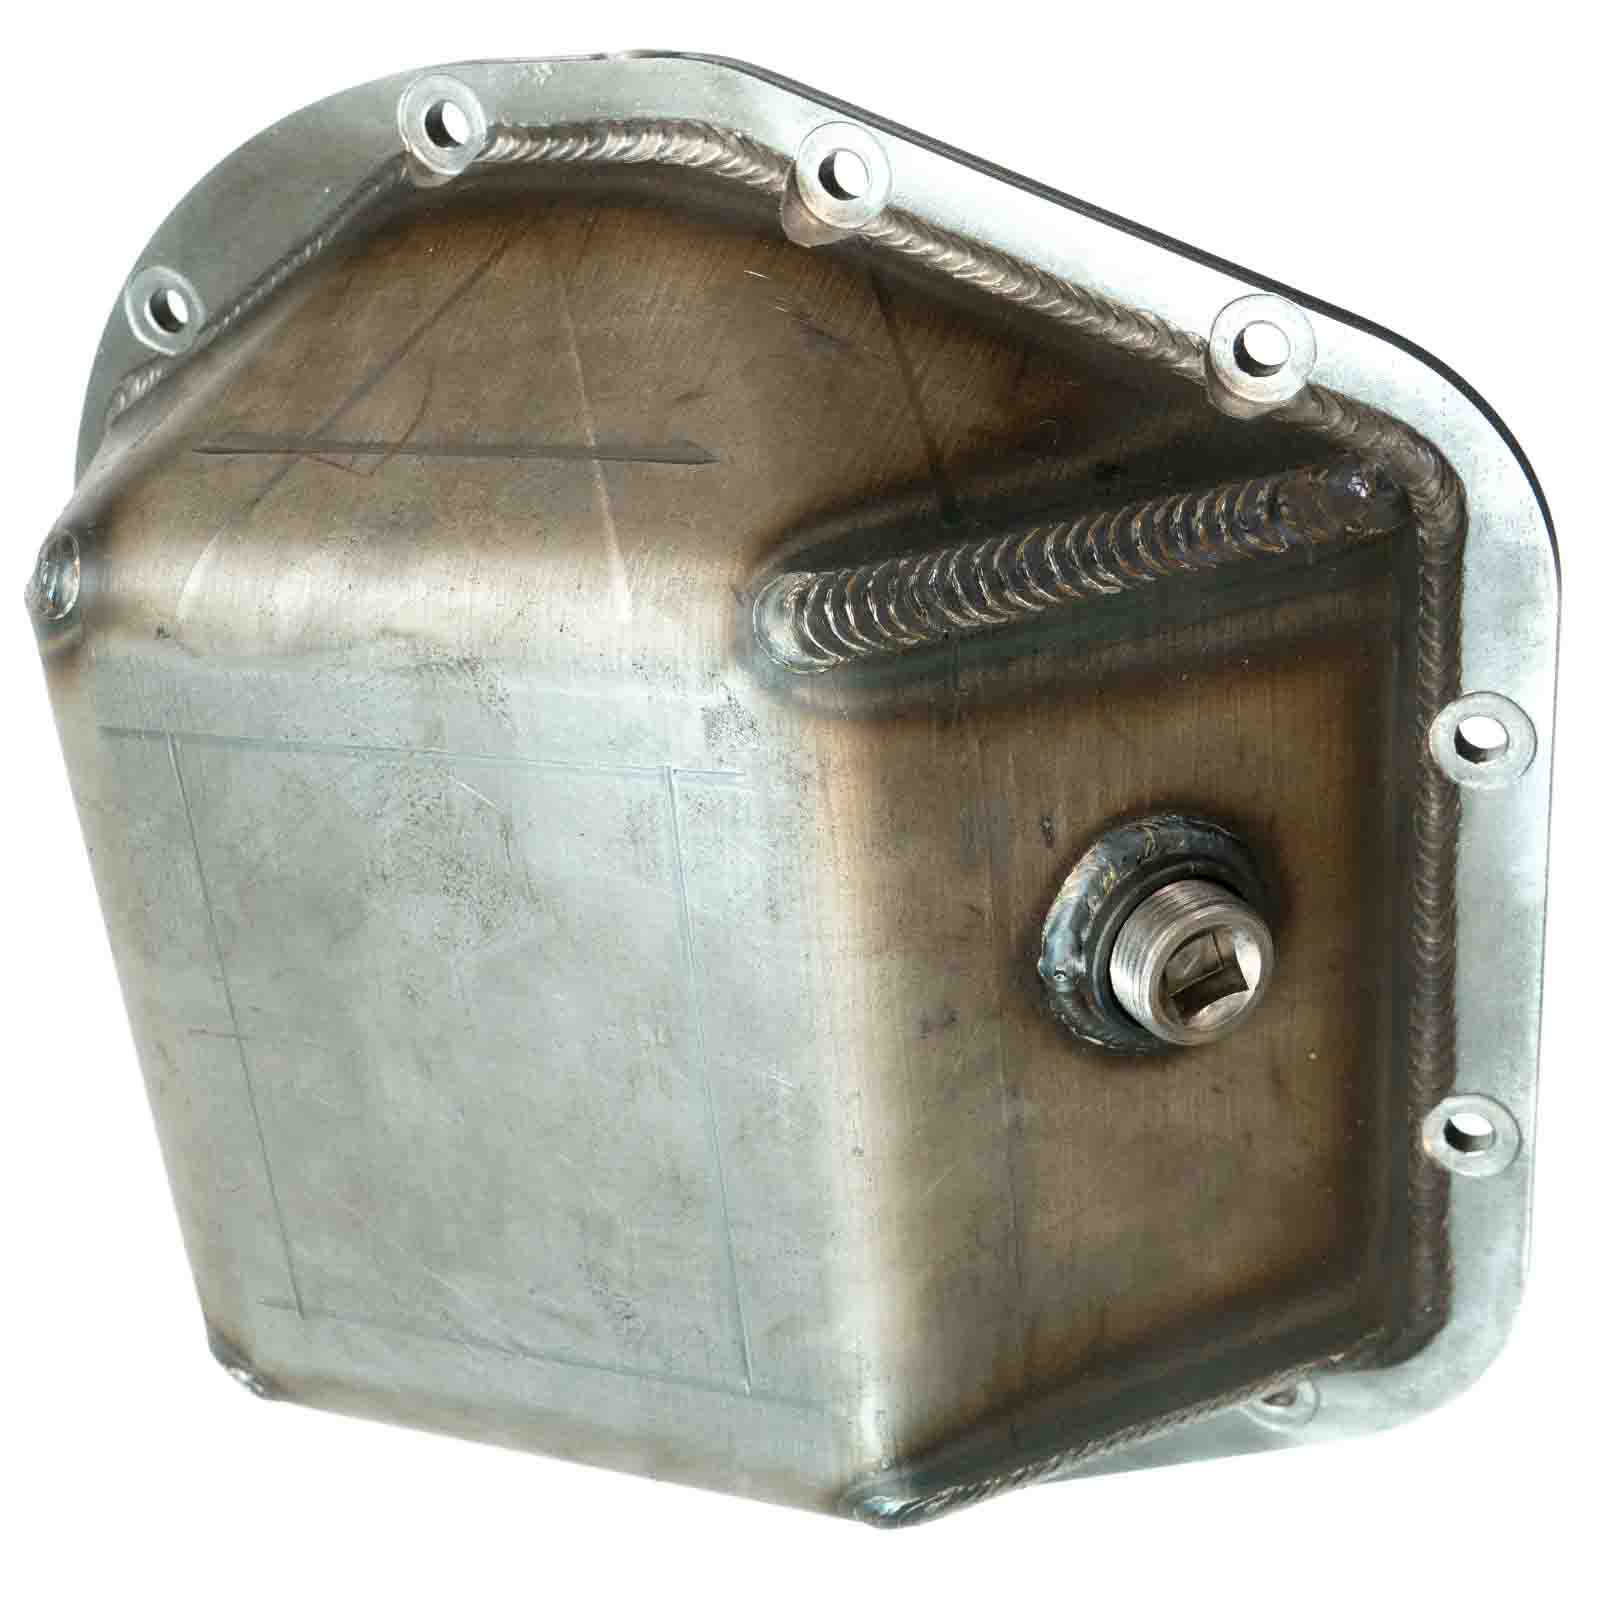 RuffStuff Specialties Heavy Duty Rear Differential Cover For Ford Sterling 10.25/10.5 Full Float Axles